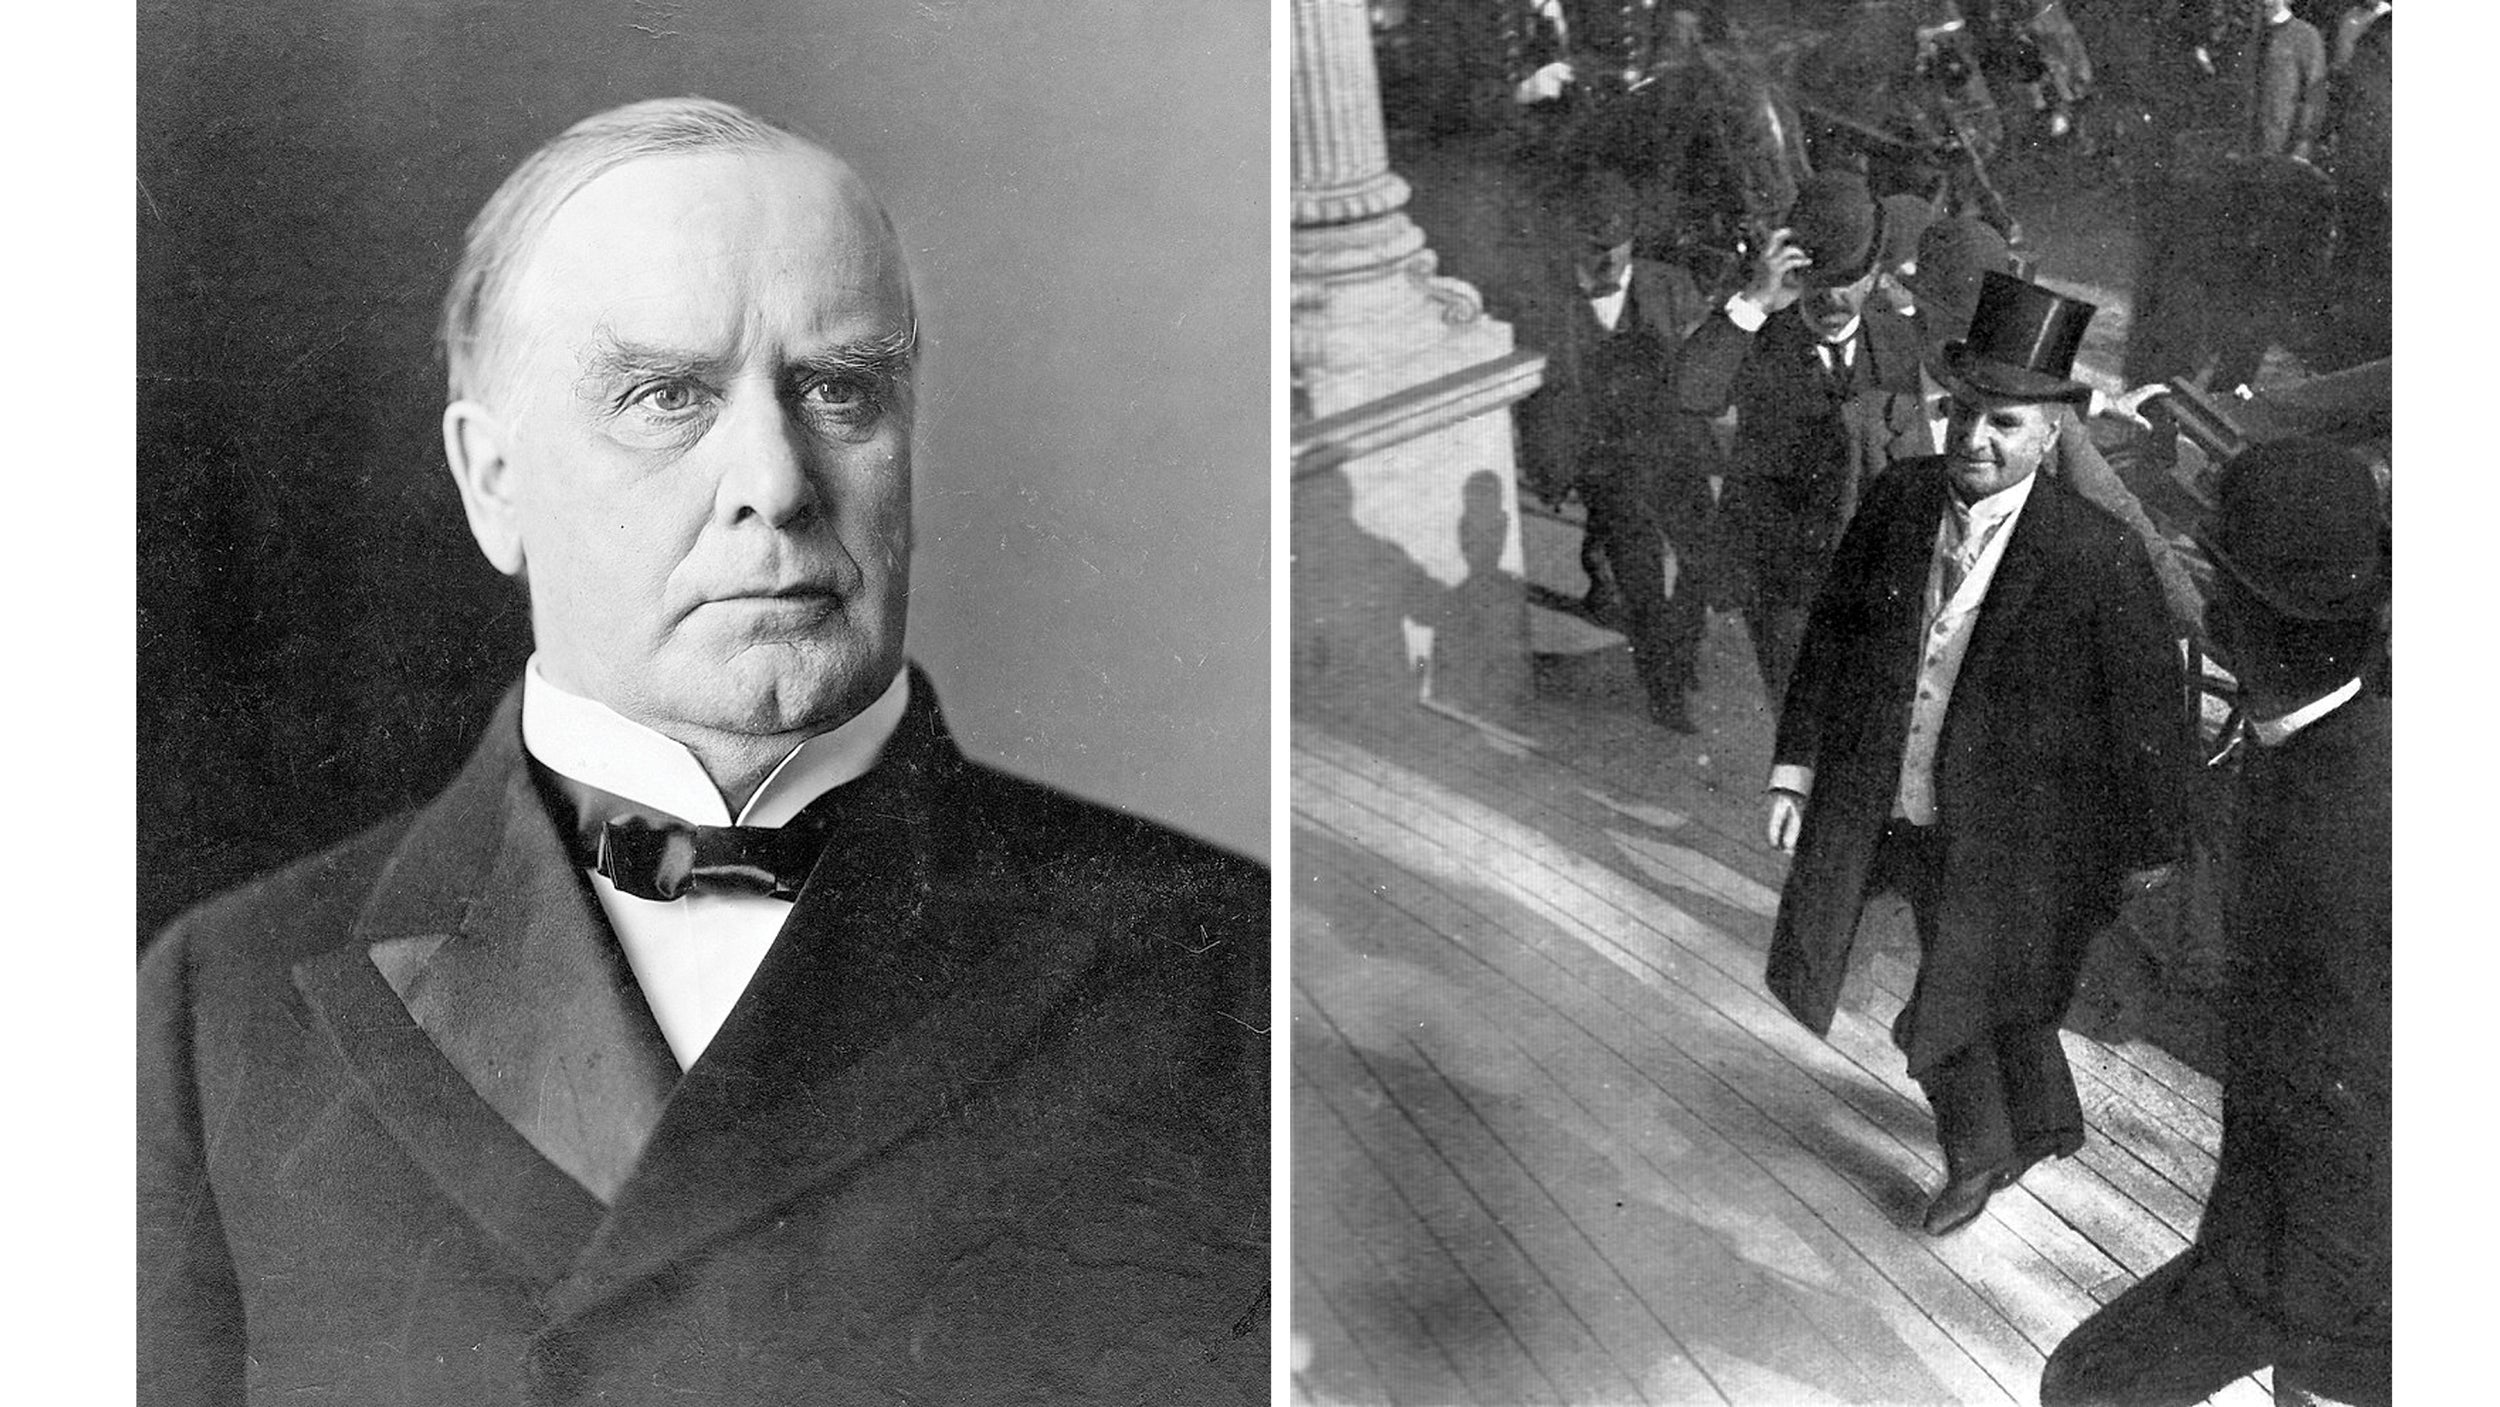 HISTORY LESSON Sept. 1901 An Ohio president dies in office The